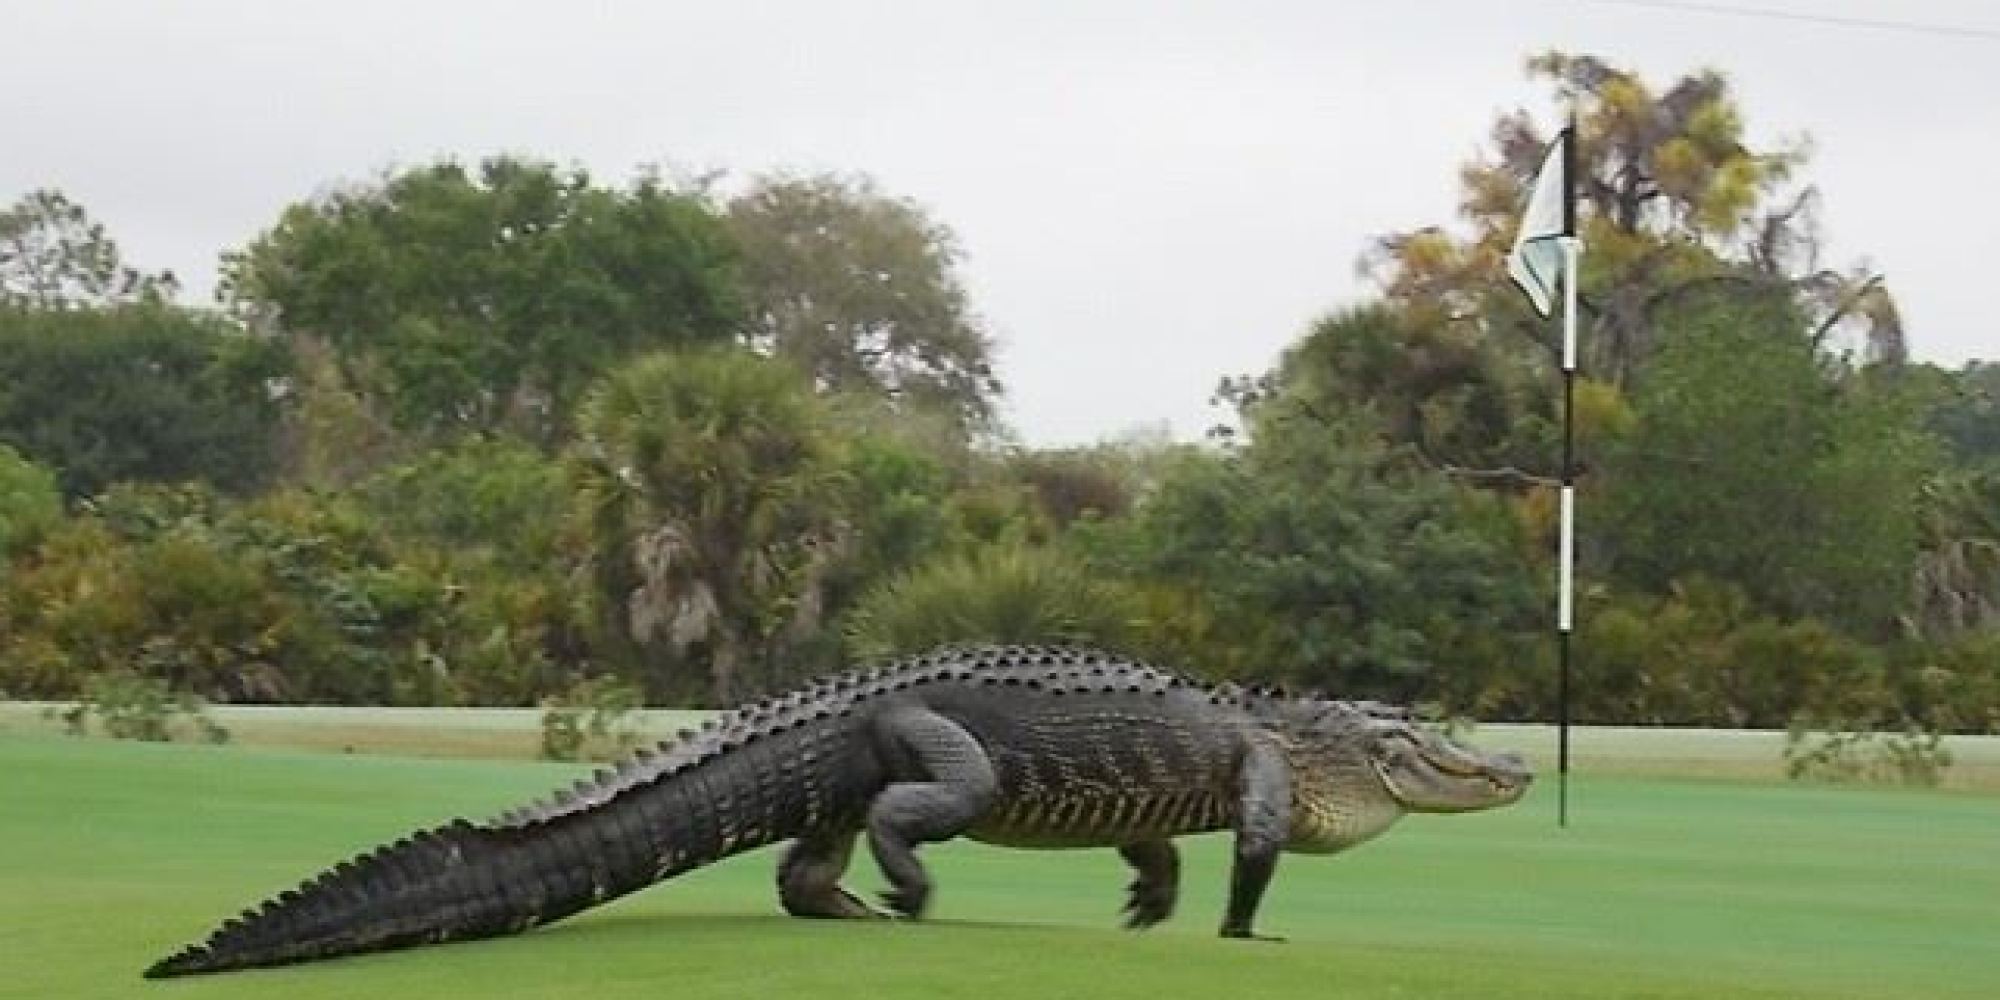 Massive Alligator Stakes Out Florida Golf Course Green, Ups Par ...